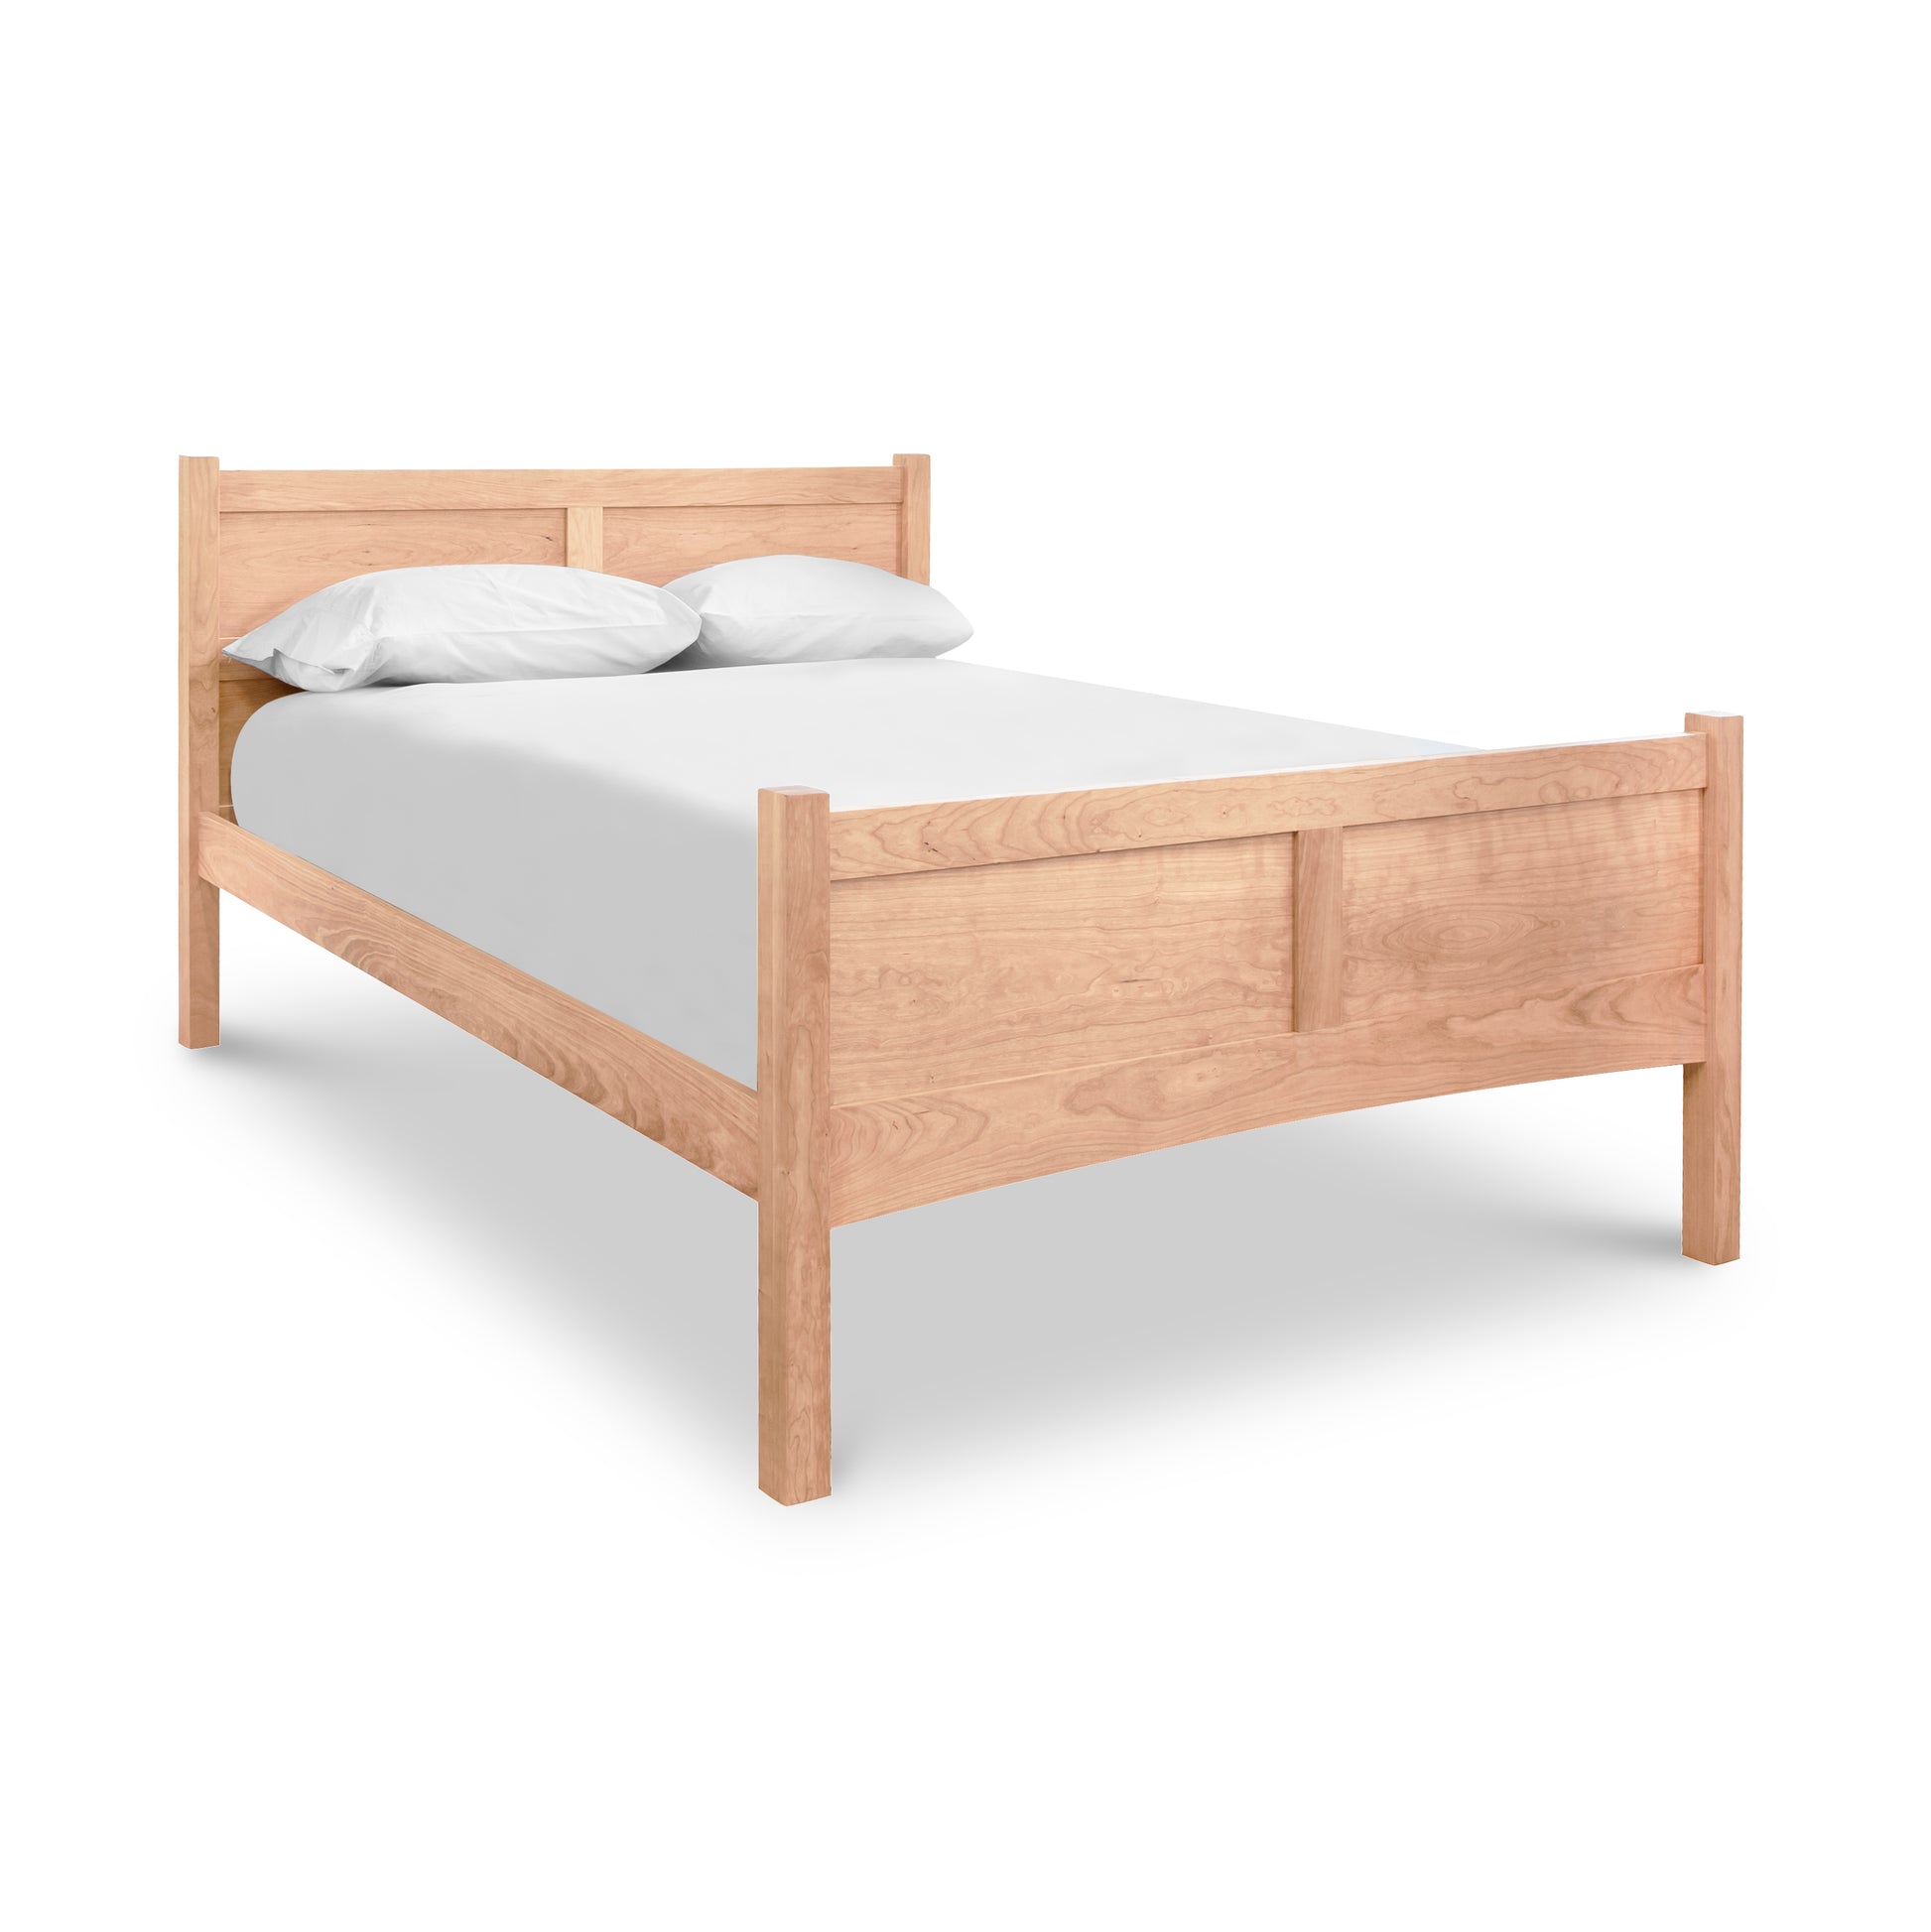 A cherry wood Vermont Furniture Designs Essex High Footboard Bed with a headboard, featuring a white sheet and two pillows, isolated on a white background.